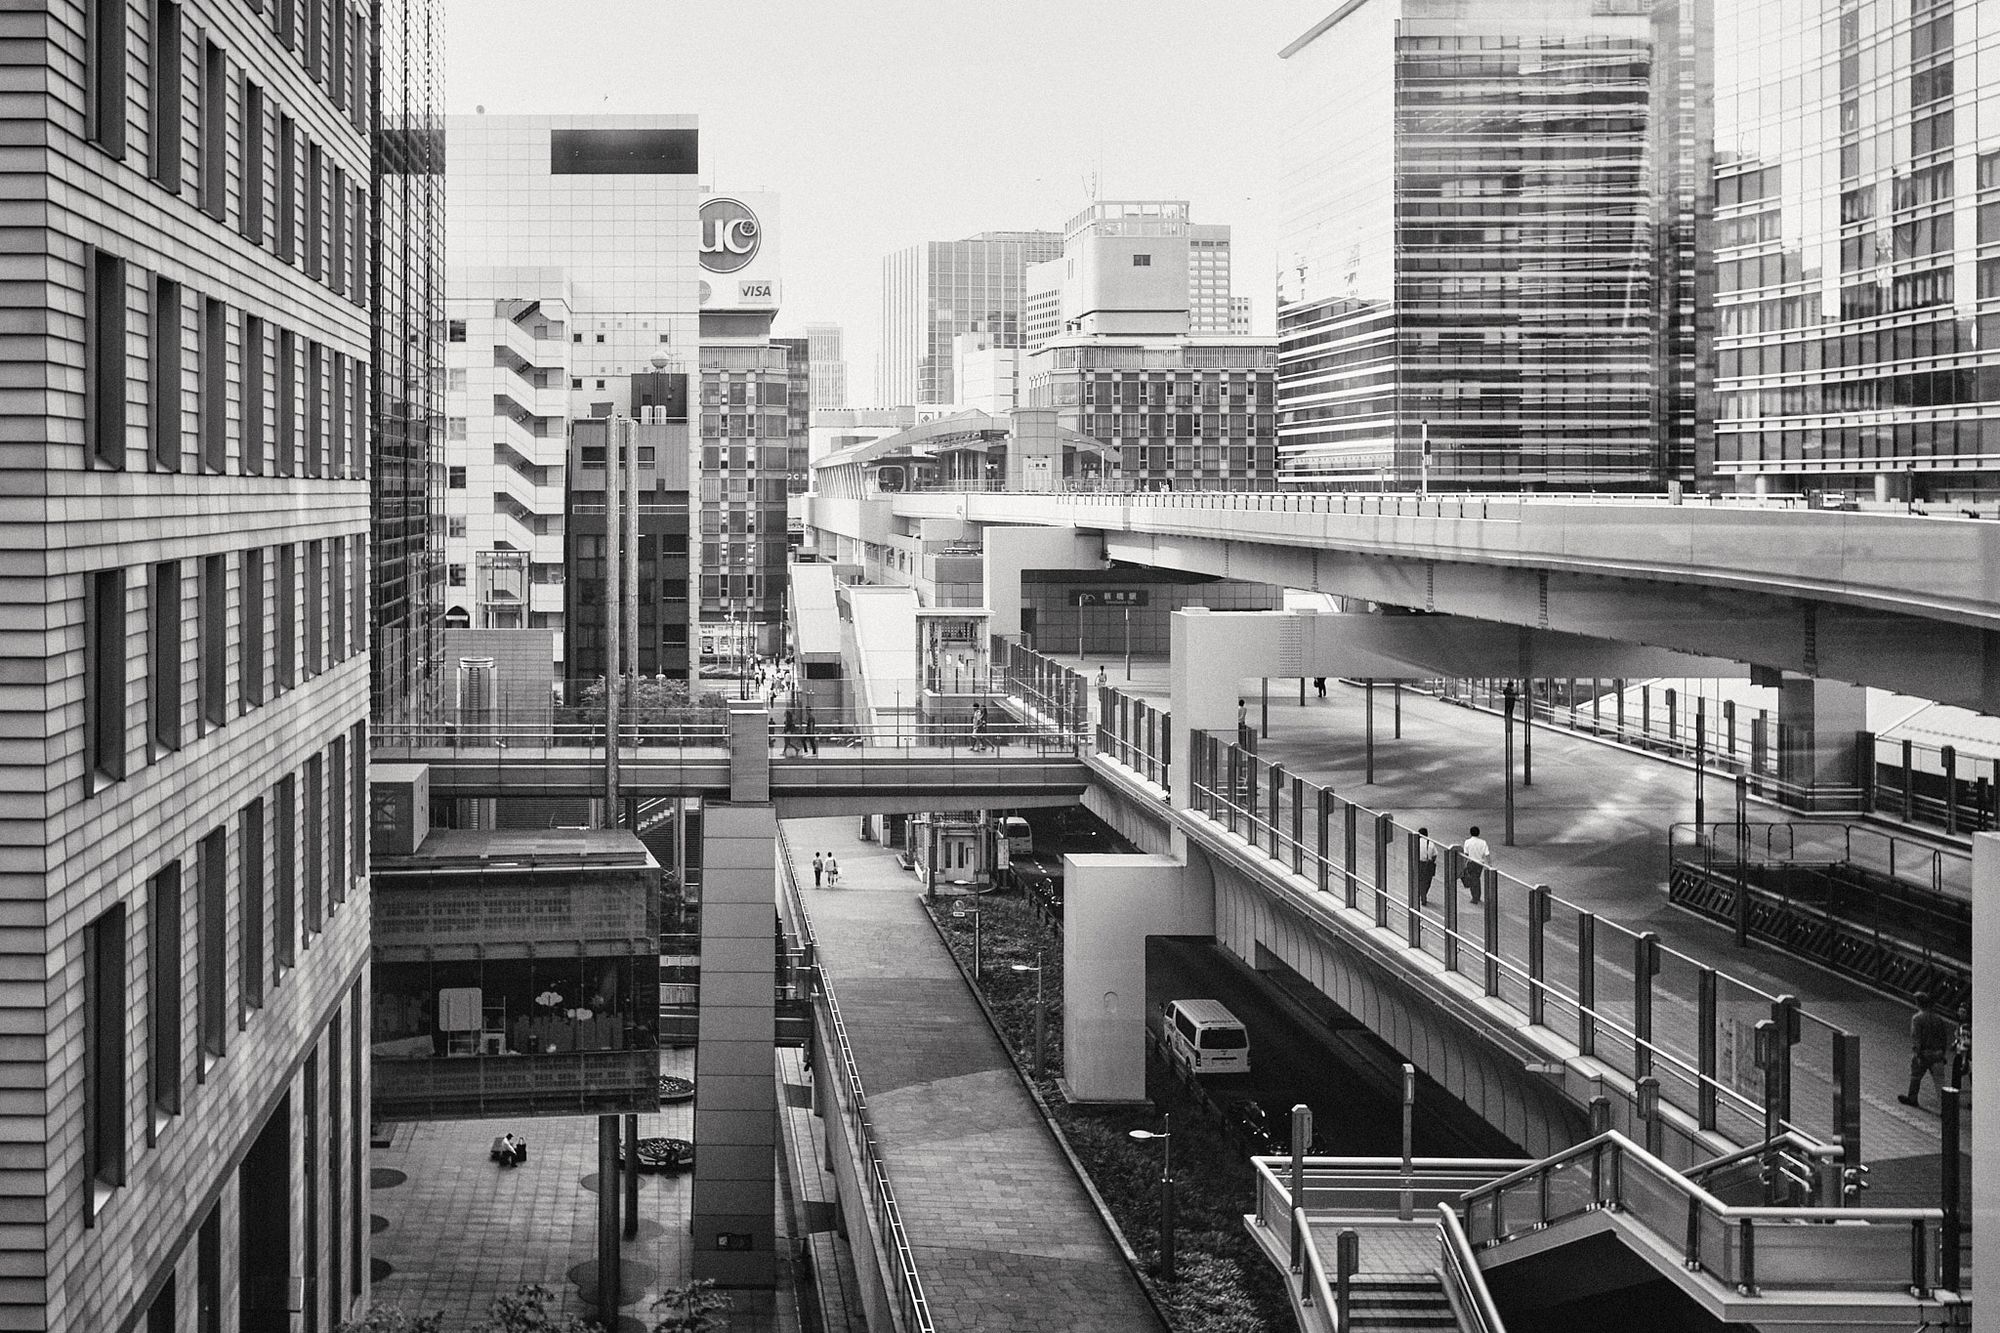 A black and white street scene from Tokyo, Japan